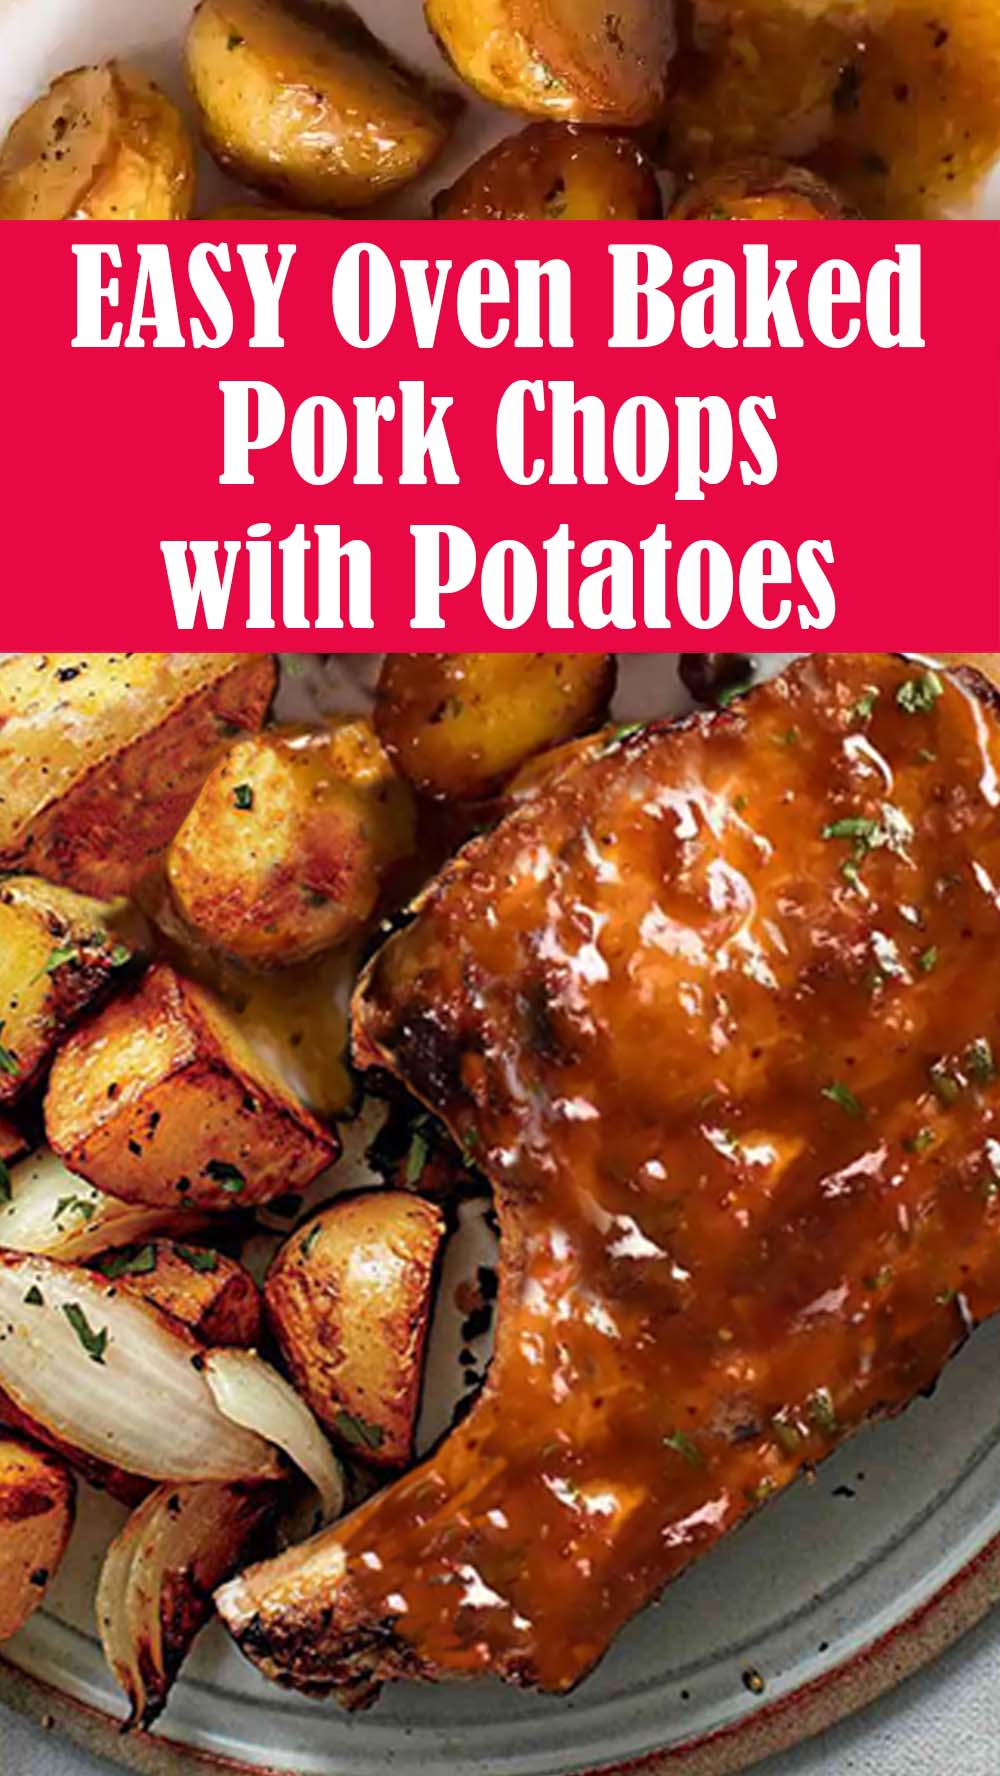 EASY Oven Baked Pork Chops with Potatoes